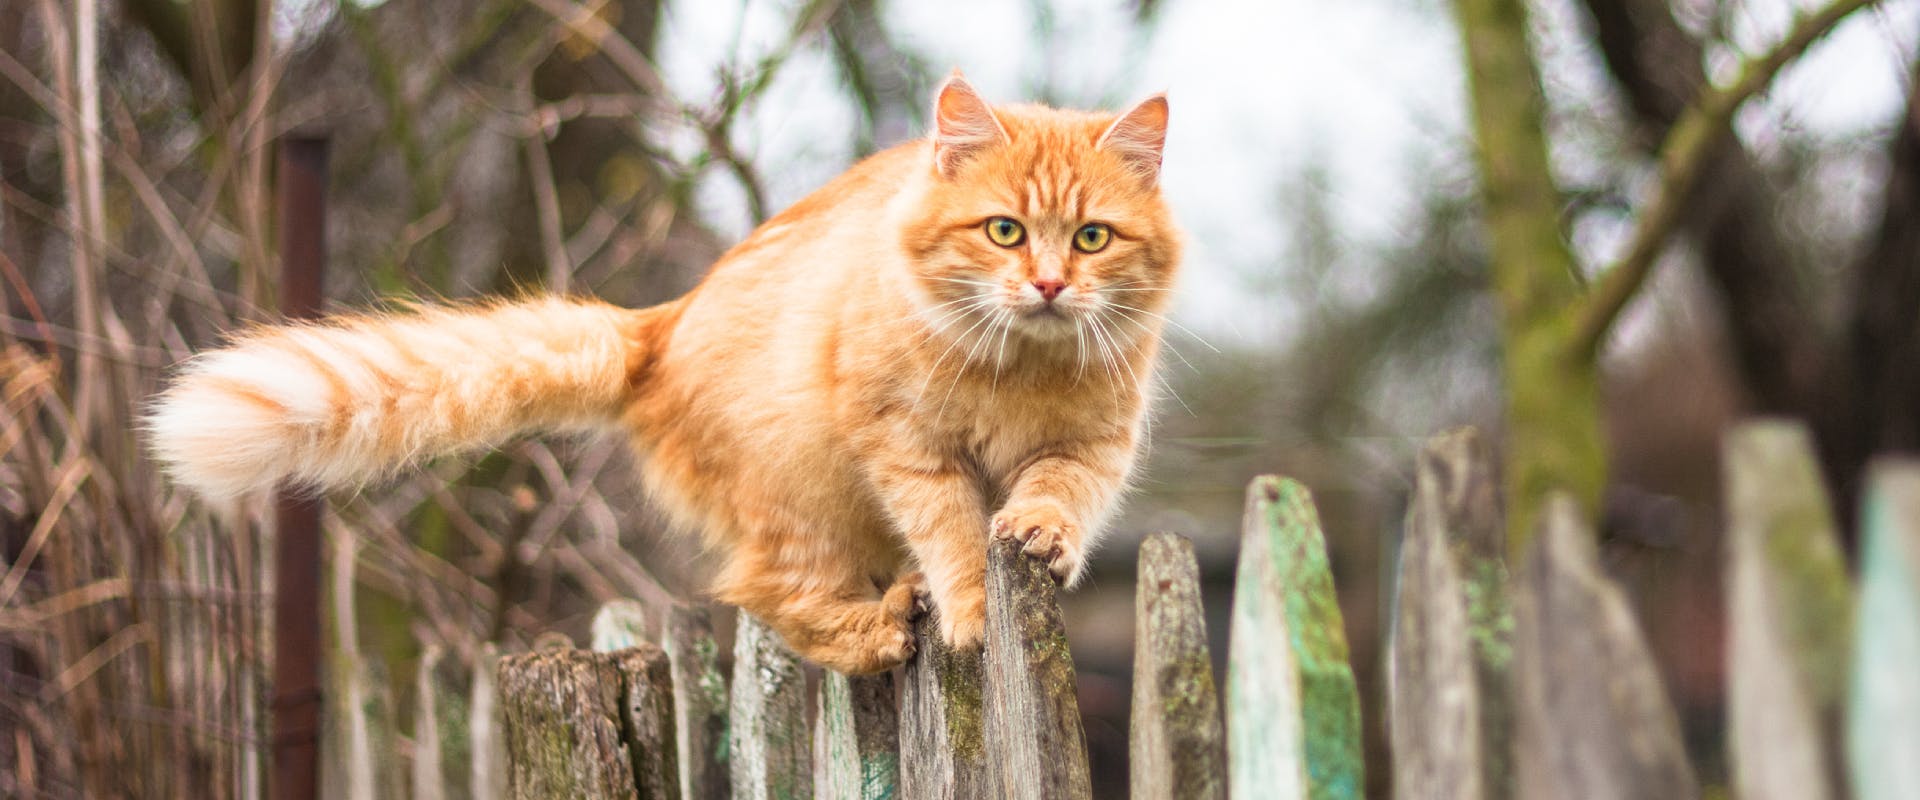 ginger cat balancing on a wooden fence